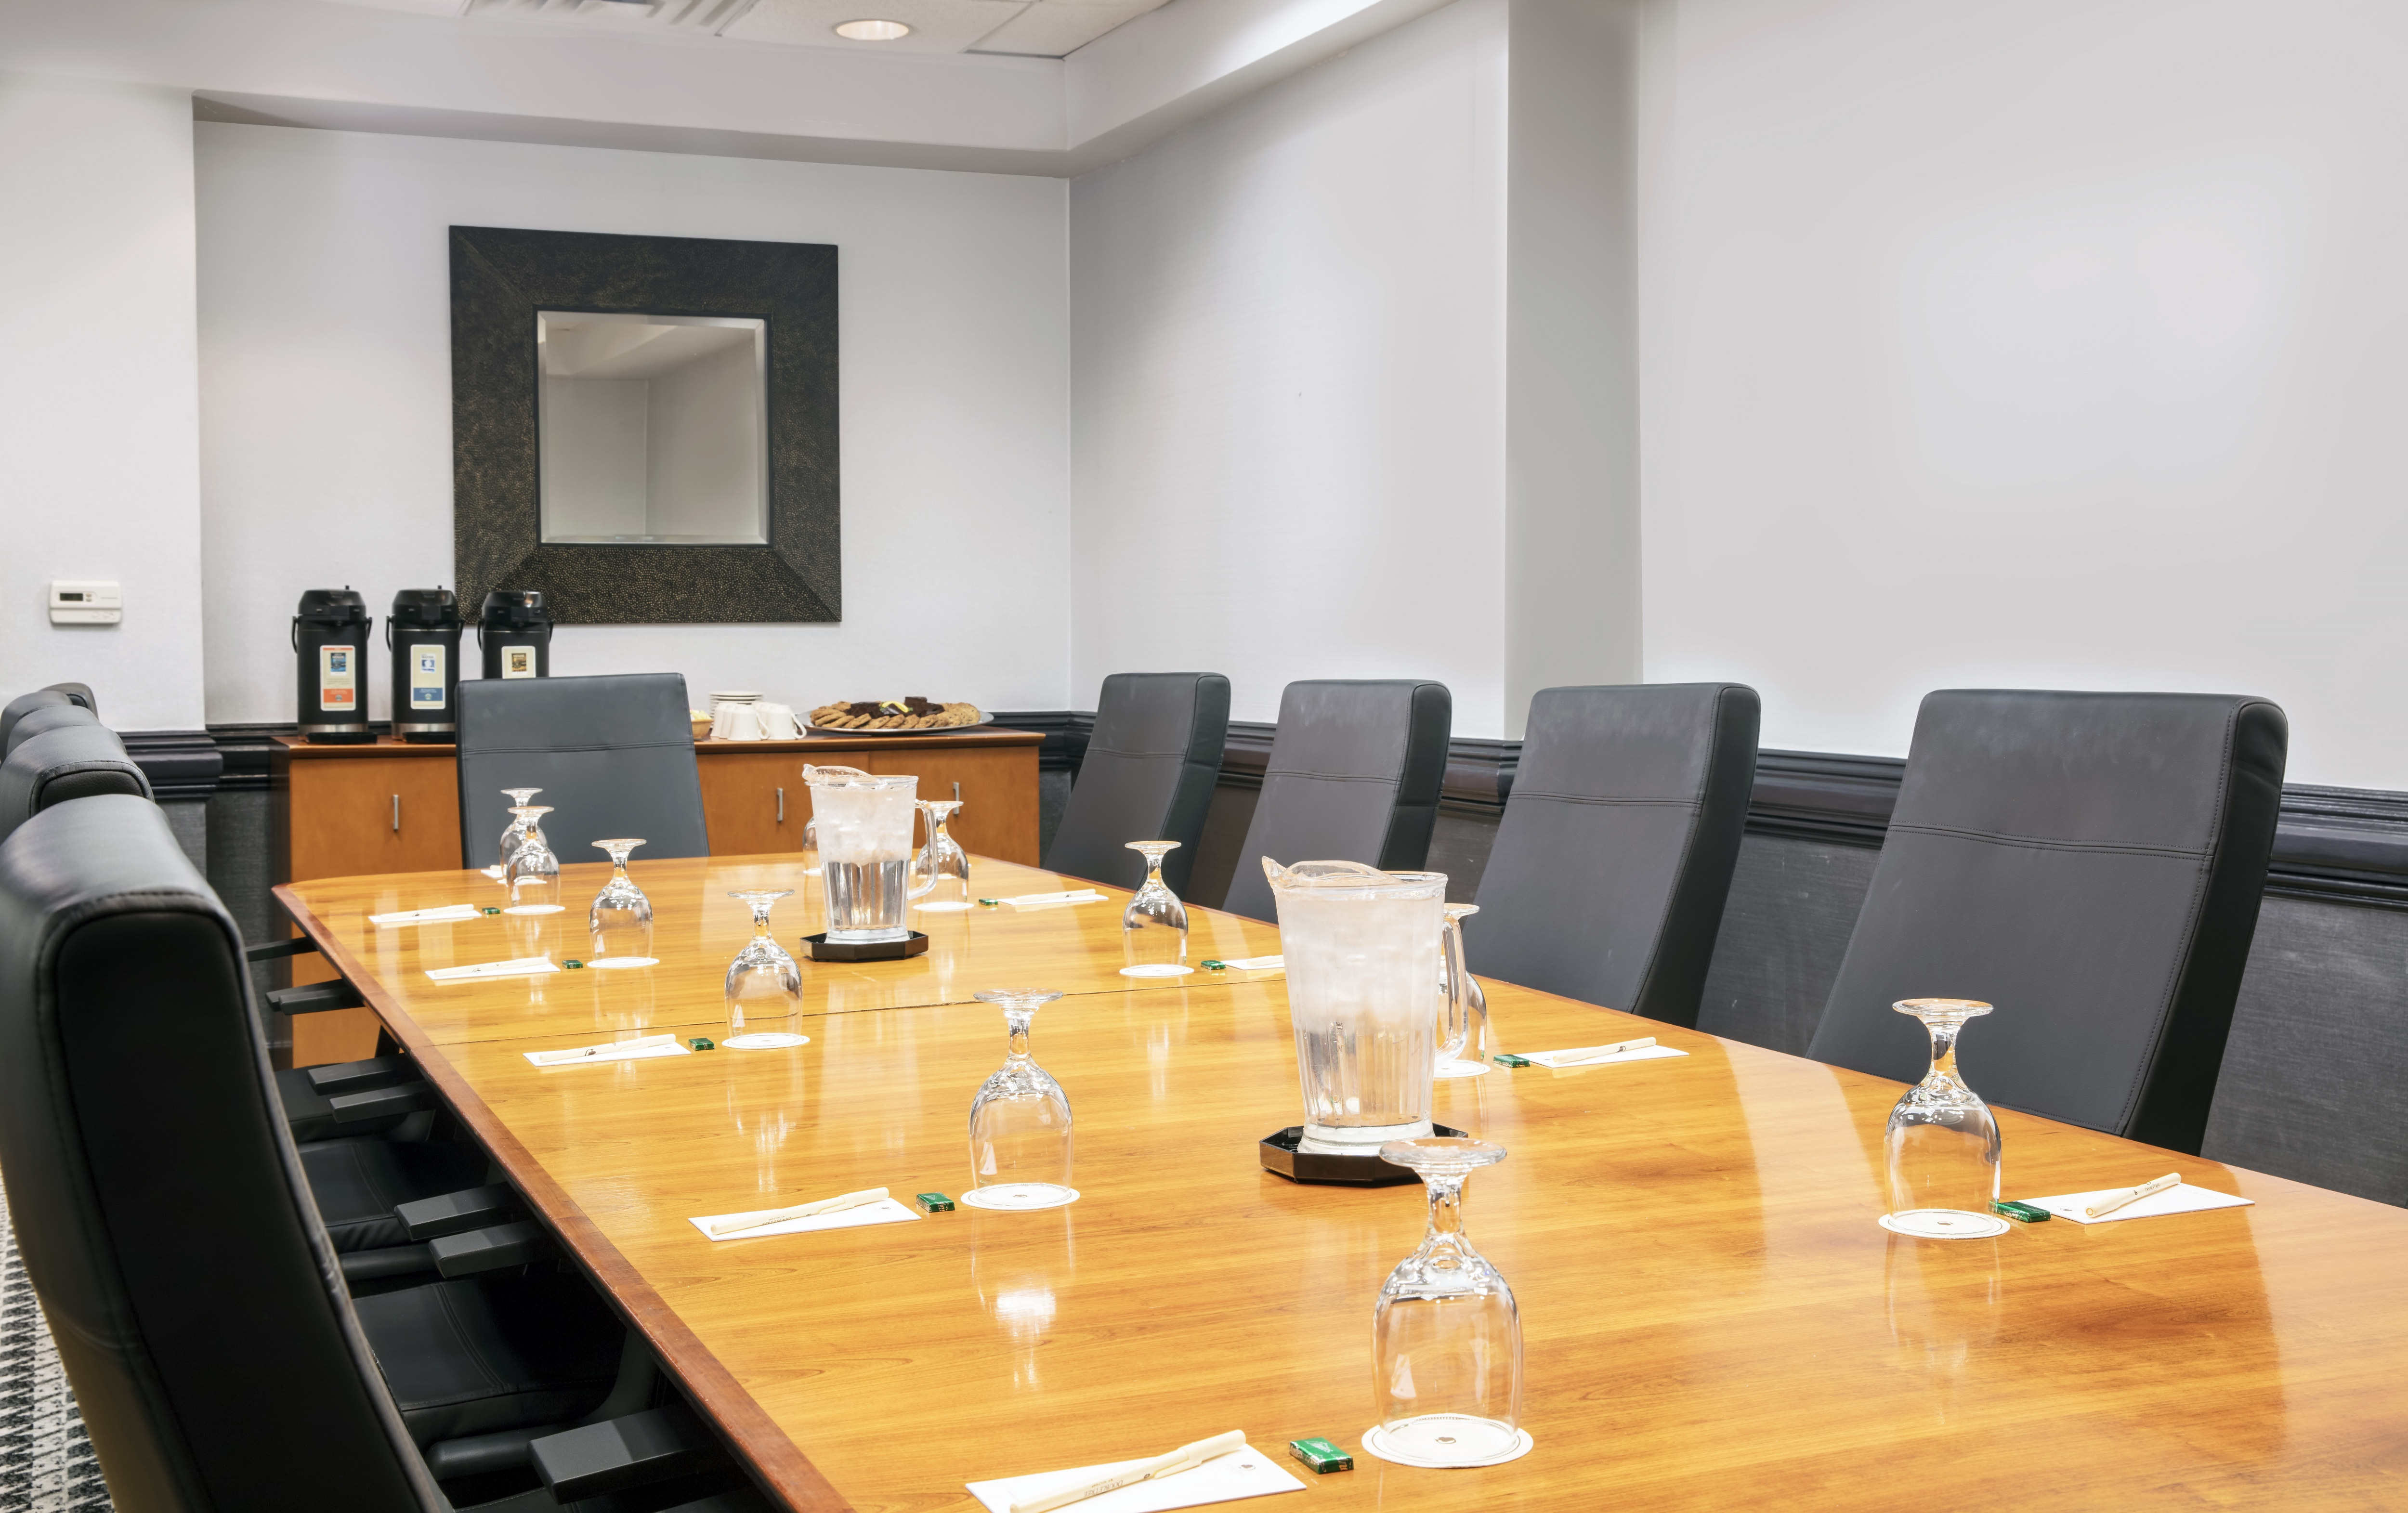 Boardroom with Large Meeting Table, Office Chairs and Coffee Station